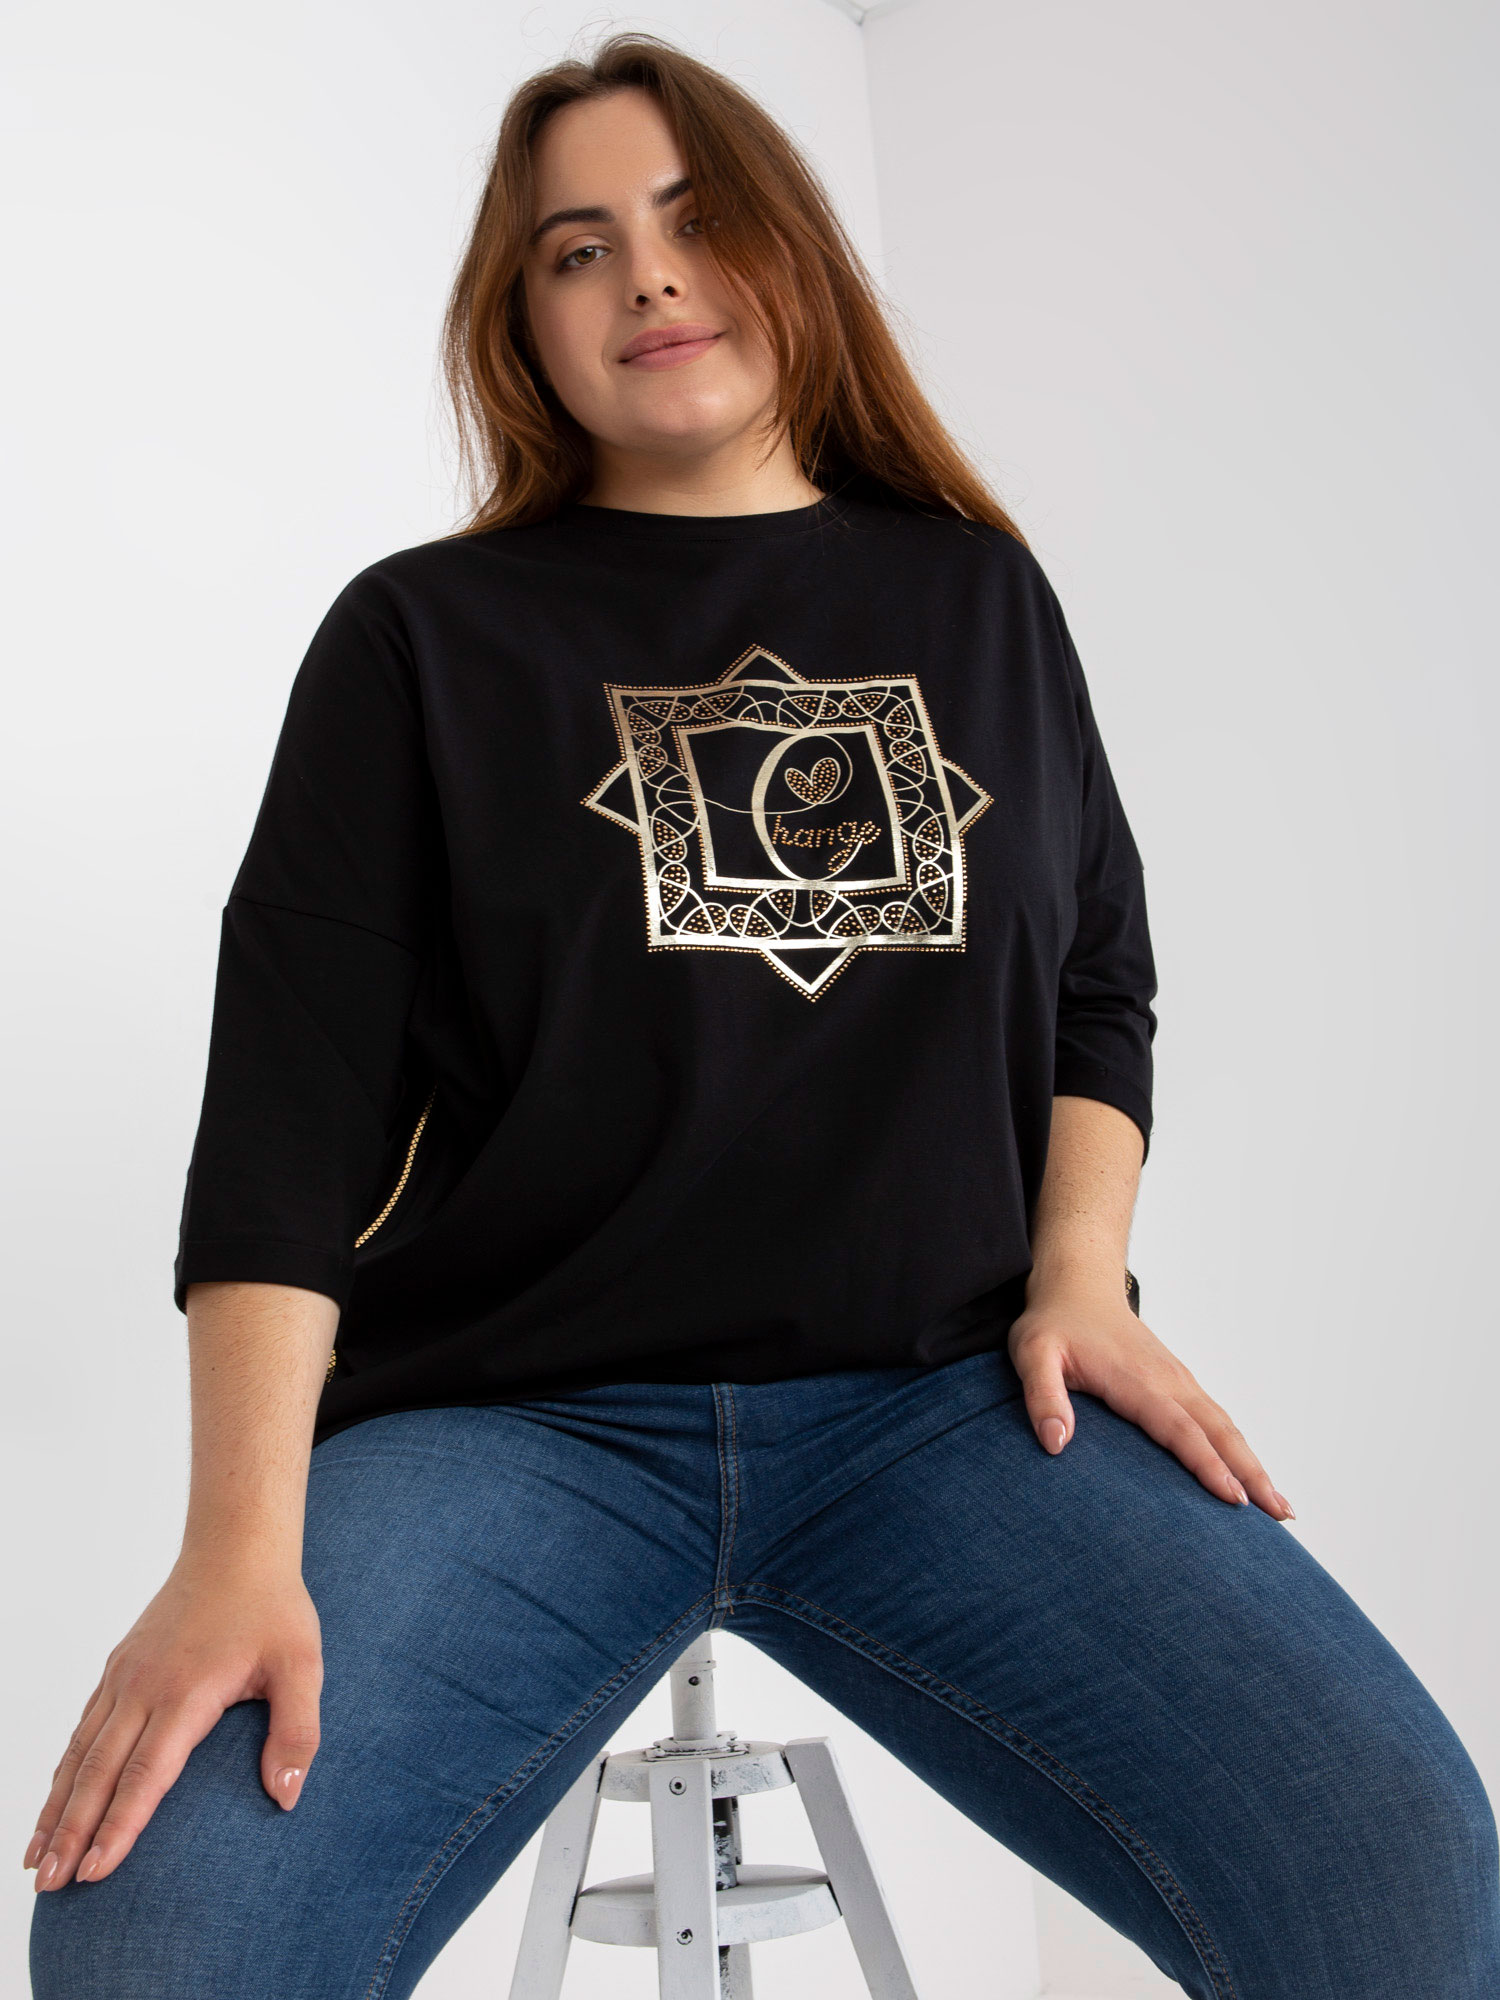 Black blouse plus size with gold print